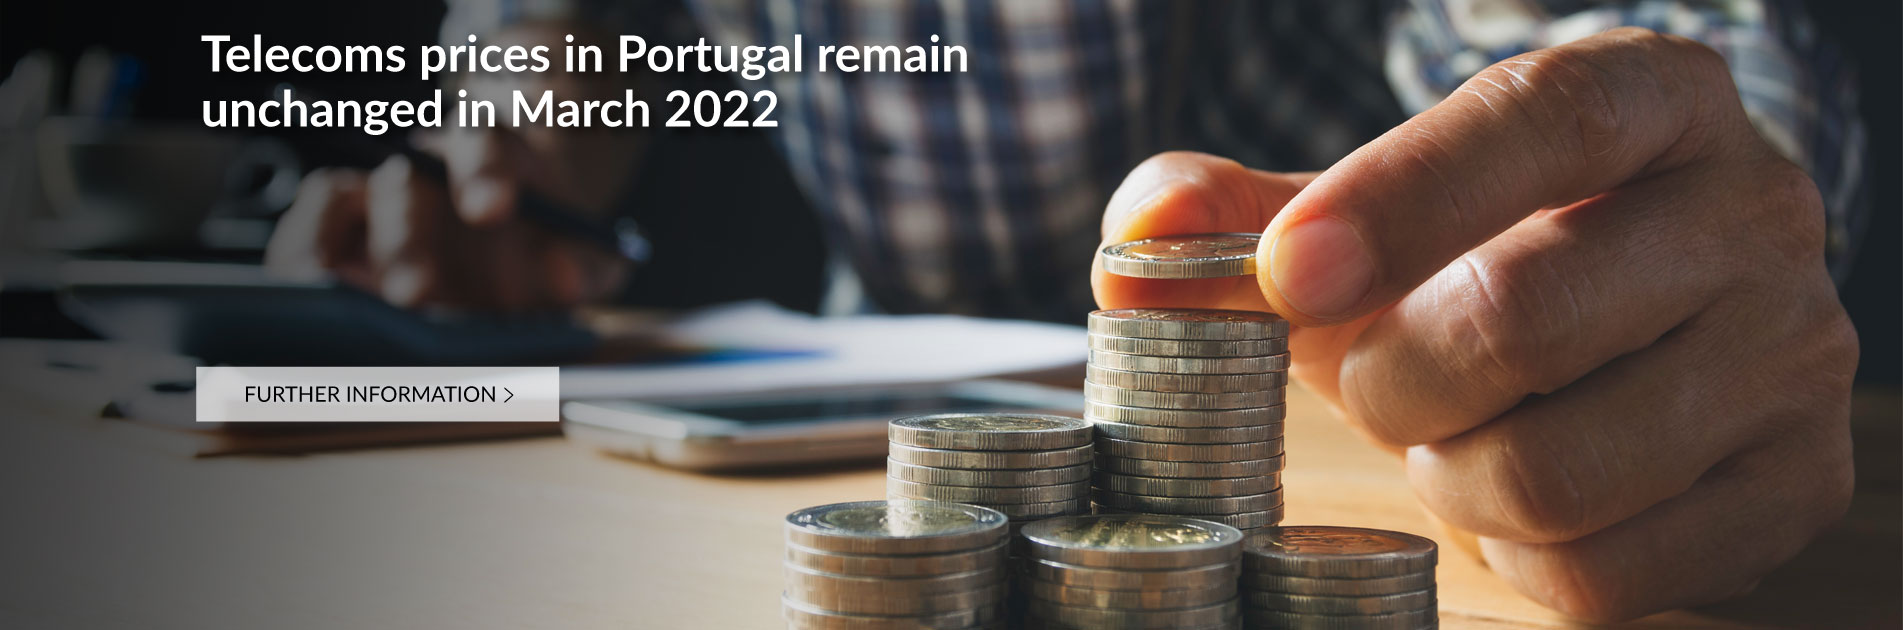 Average change in telecommunications prices in Portugal was higher than in the European Union in February 2022